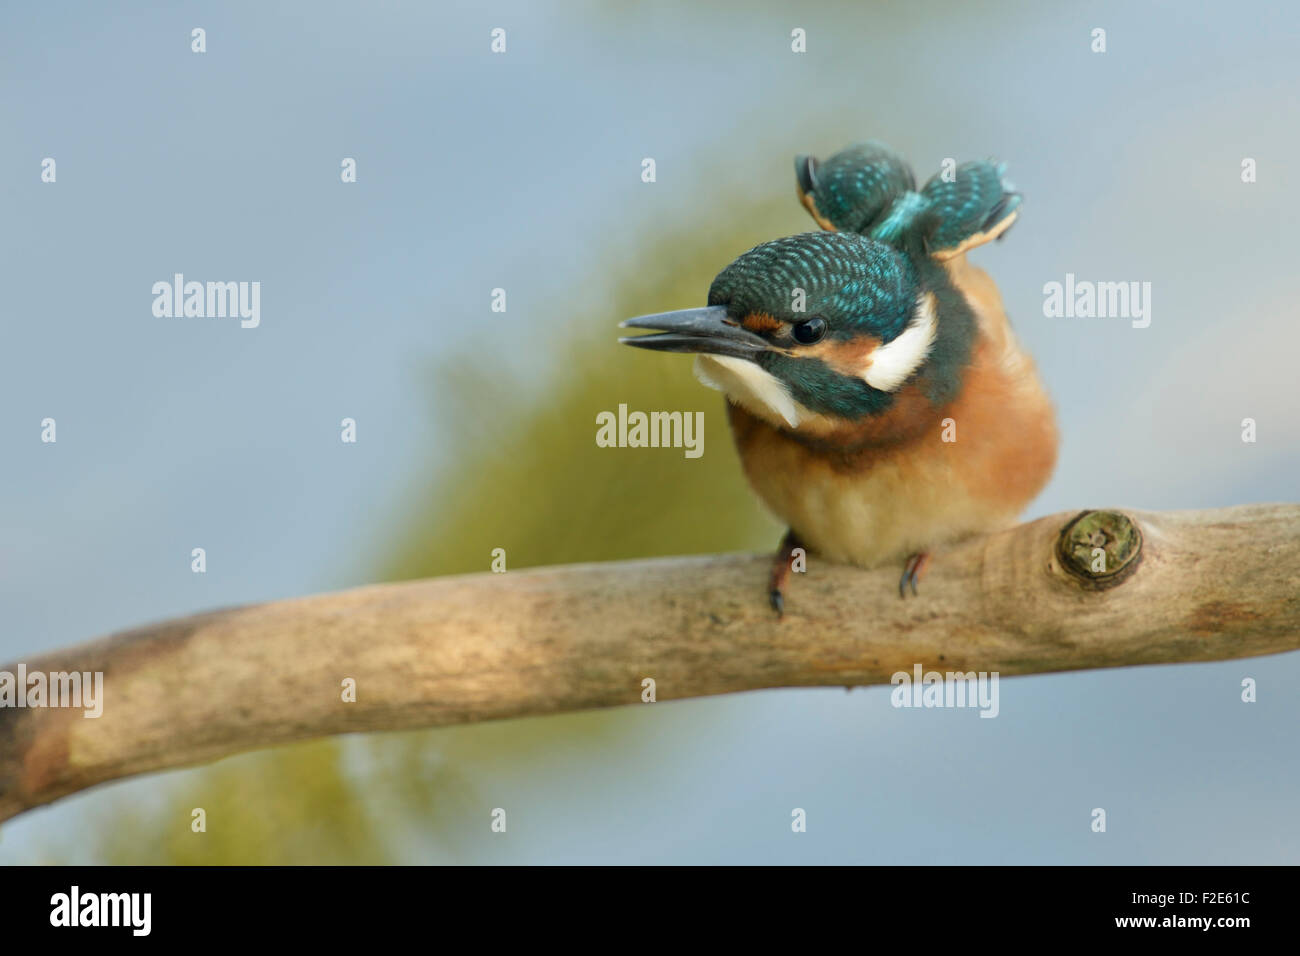 Alcedo atthis / Common Kingfisher / Eisvogel his wings while begging for food. Stock Photo